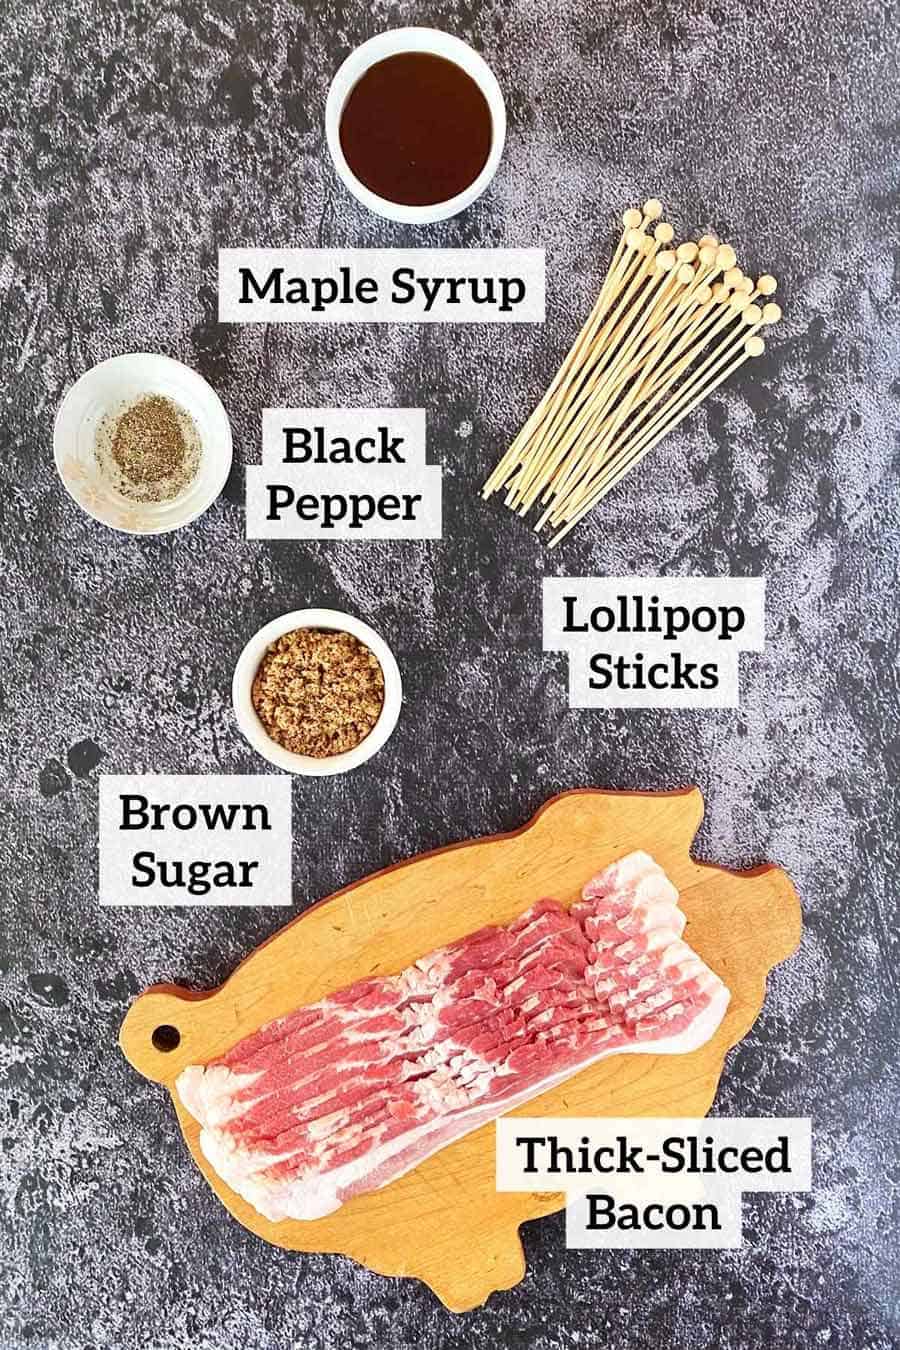 Maple syrup, brown sugar, black pepper, lollipop sticks, and thick cut bacon.